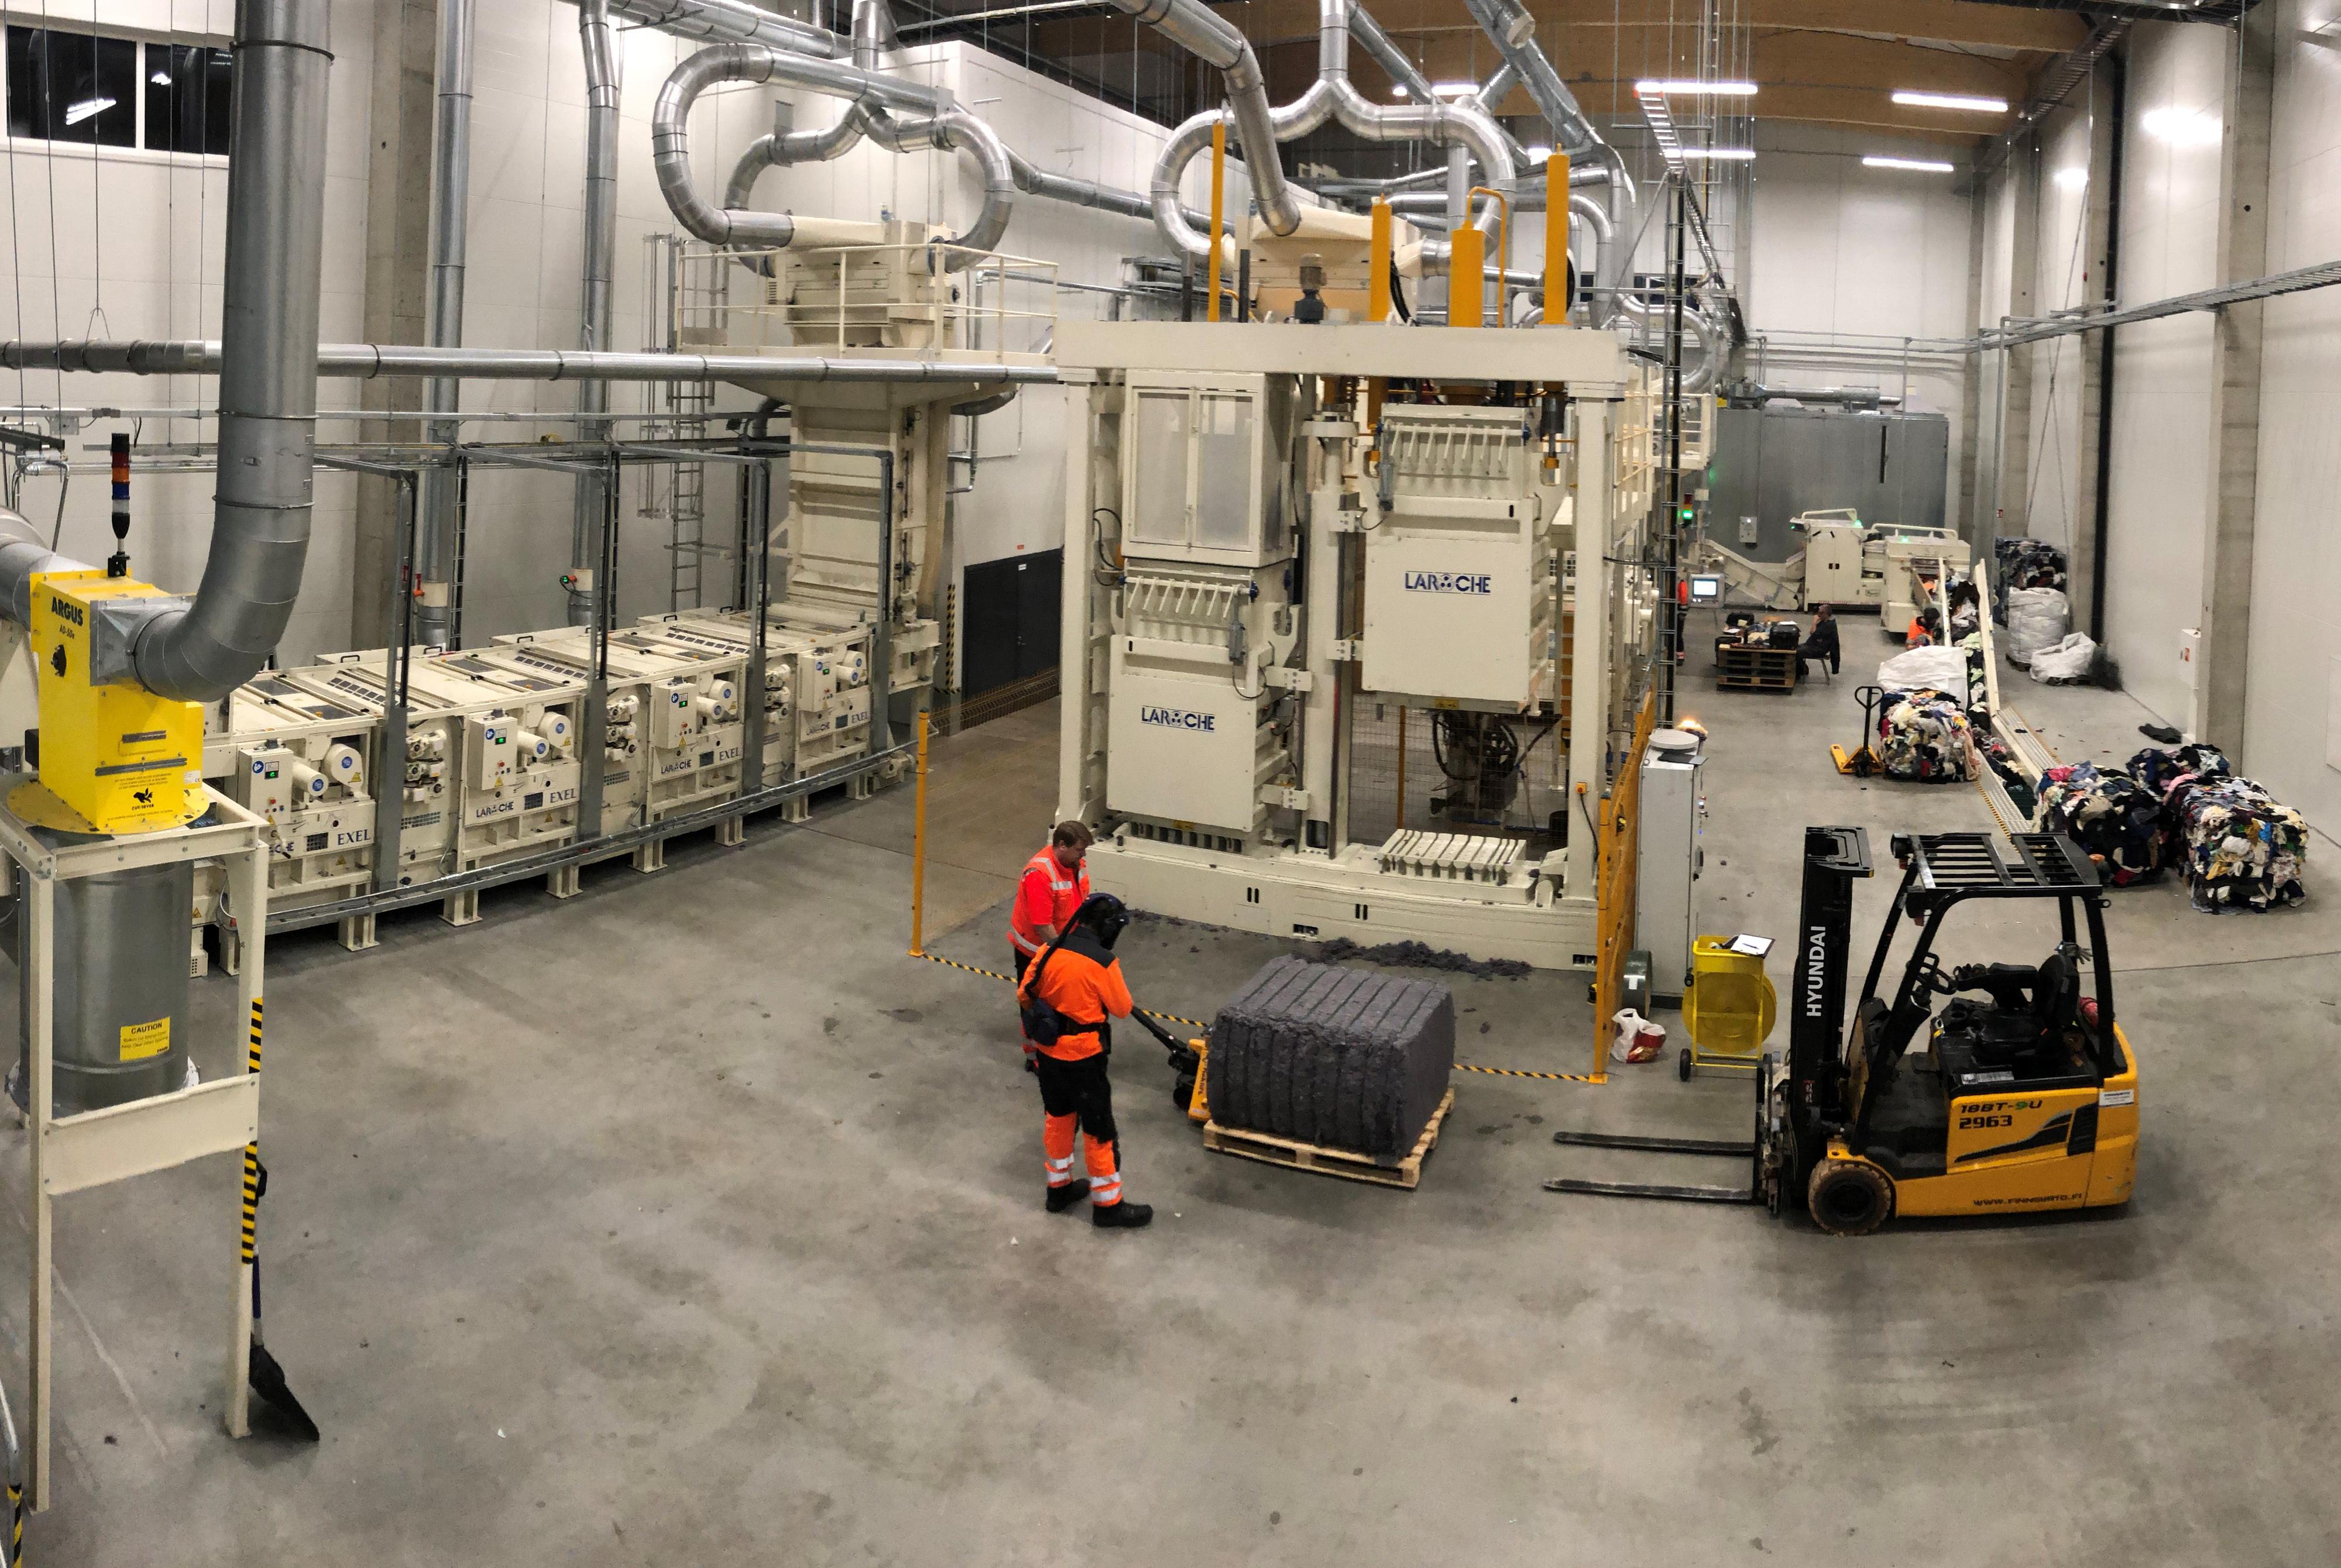 Lounais-Suomen Jätehuolto successfully starts up ANDRITZ pilot line for  post-consumer textile recycling